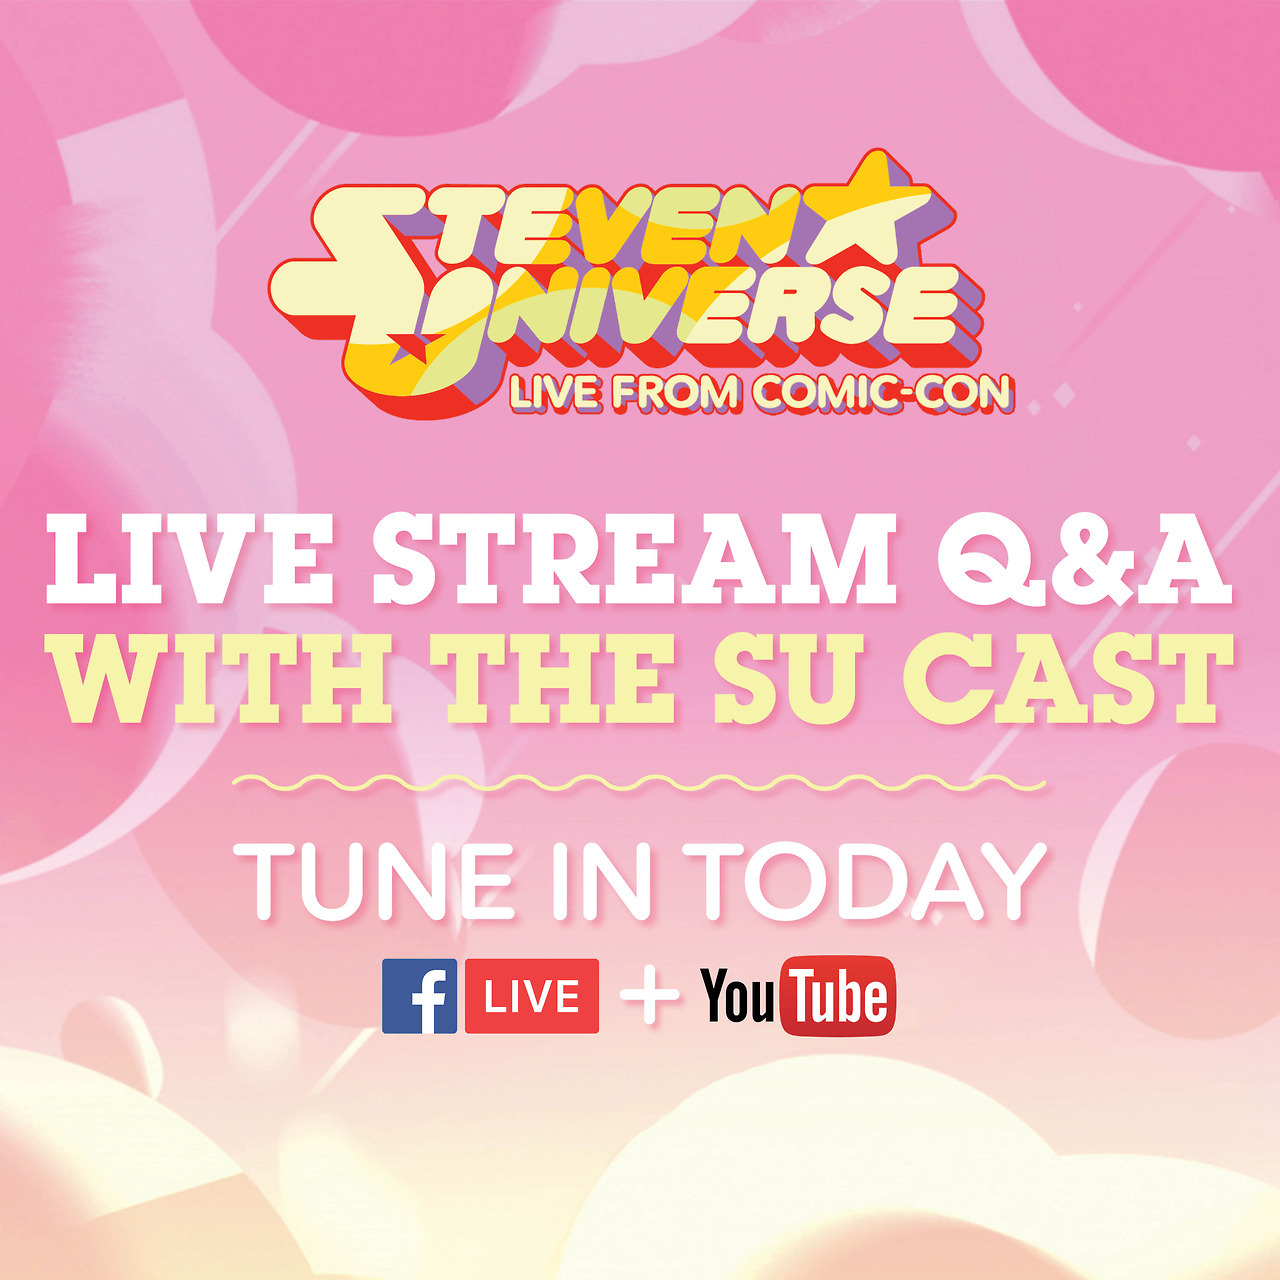 cartoonnetwork:  Stay tuned today for a special livestream with the cast of Steven